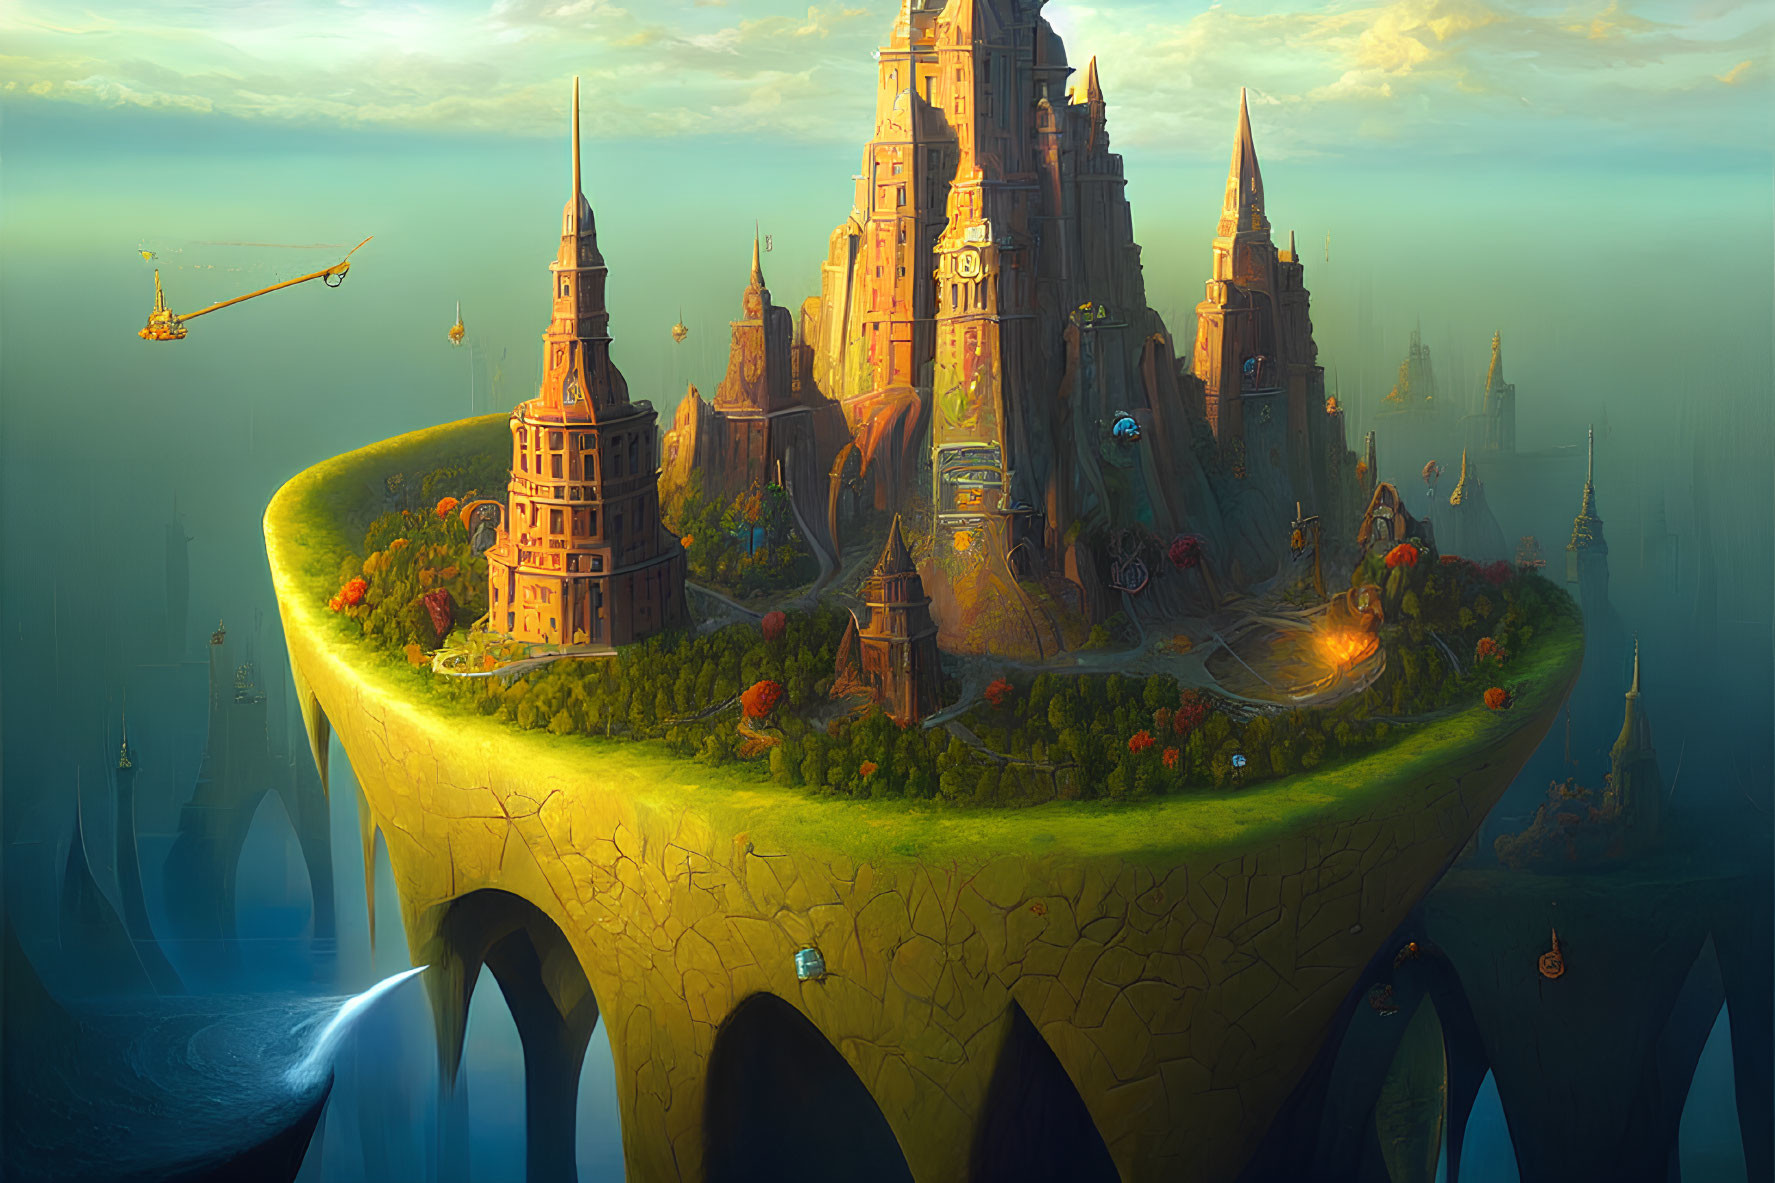 Fantasy floating island city with towers, bridges, airships in golden sunset